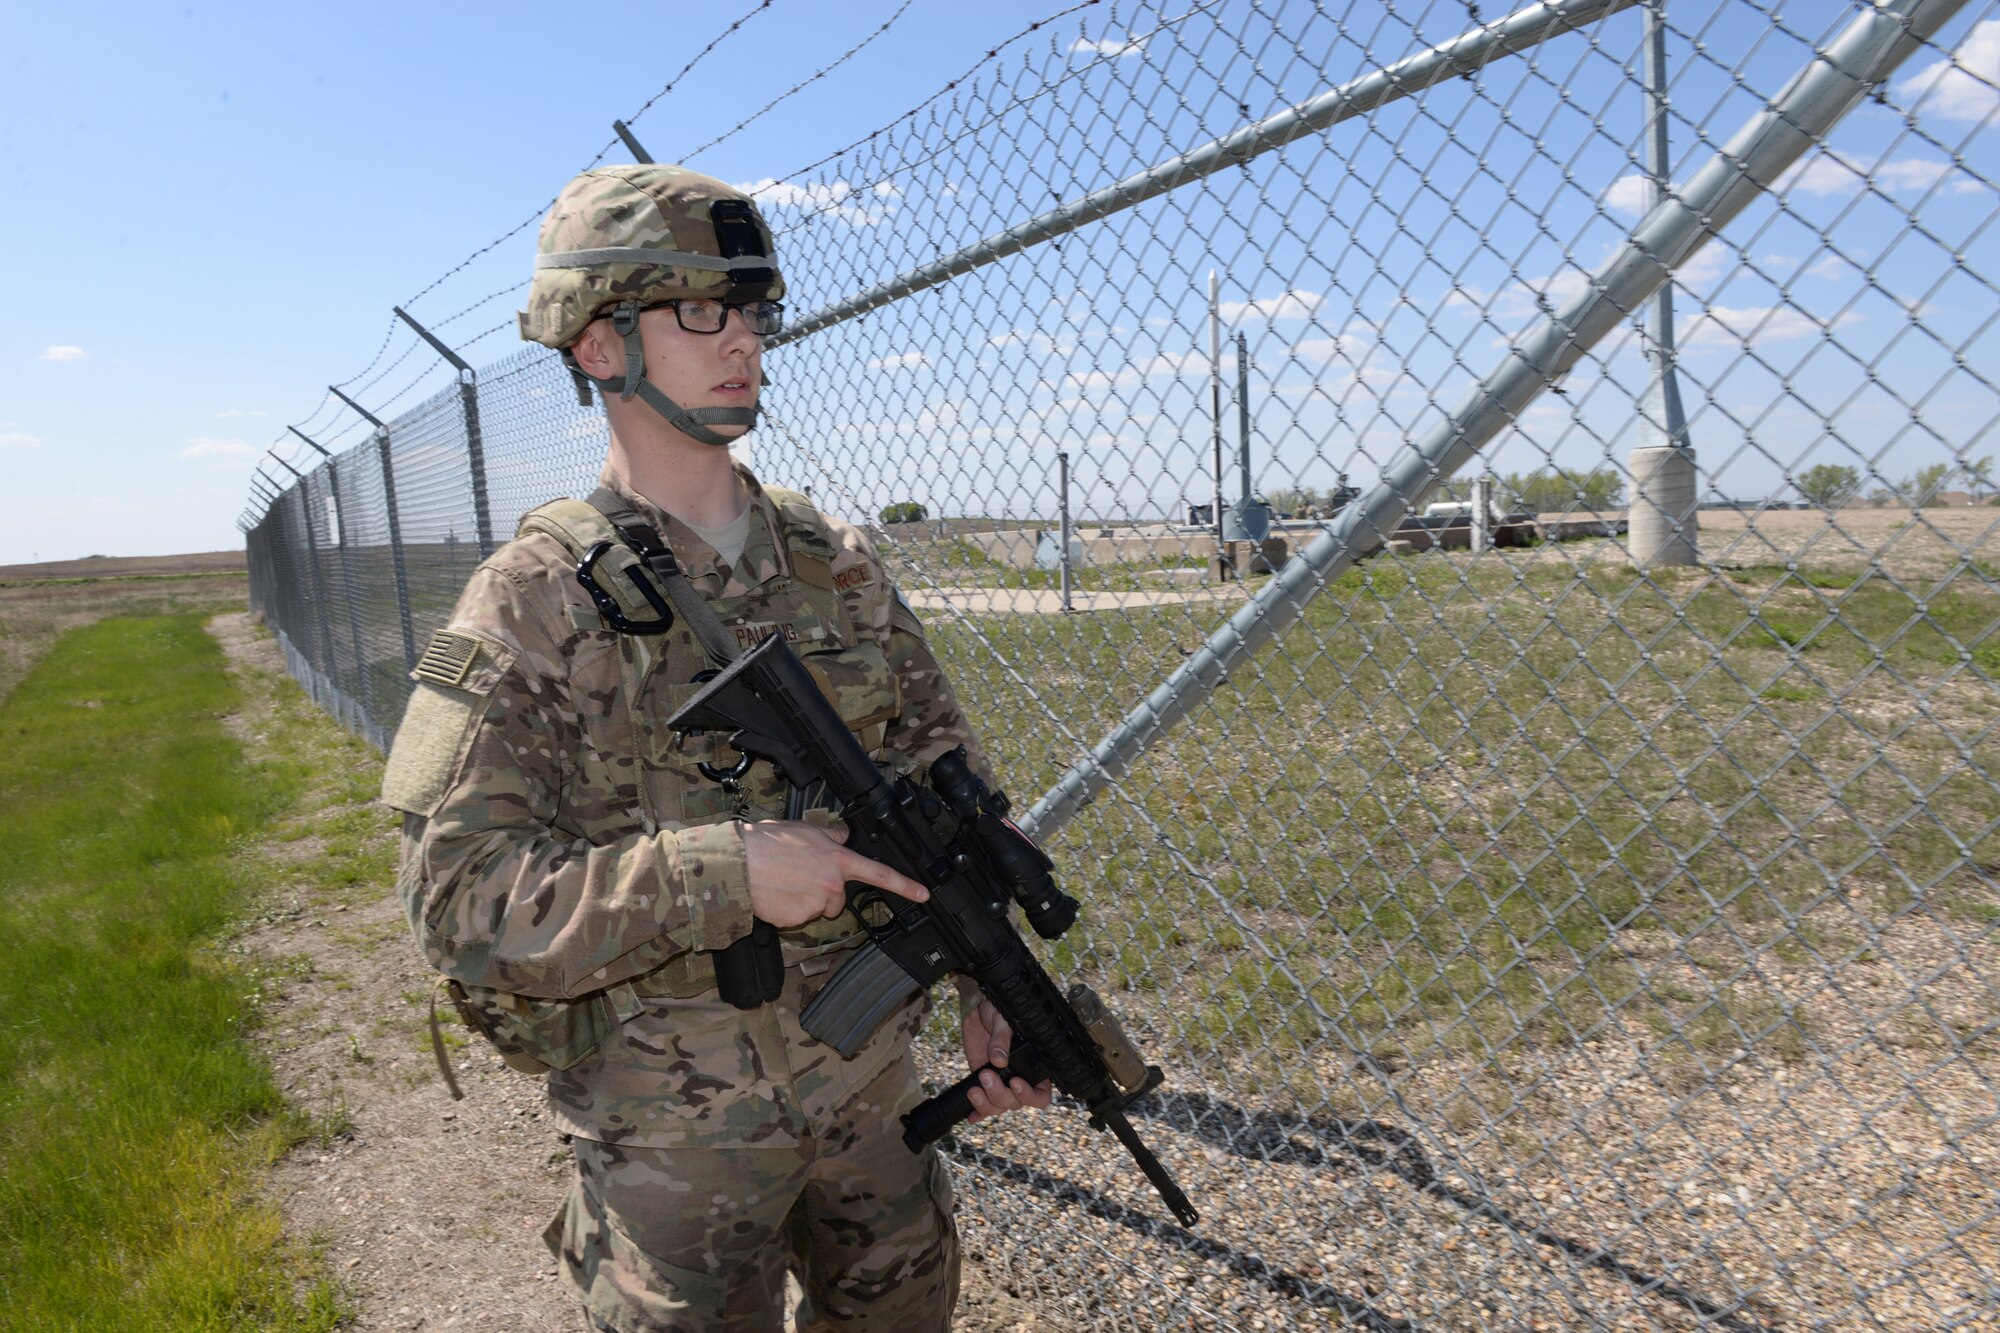 Airman 1st Class Alex Pauling, of the 219th Security Forces Squadron performs a sweep of the area for anything suspicious at a Minot Air Force Base, North Dakota, launch facility May 20, 2015. The exercise included an intermingled combination of North Dakota Air National Guard members doing their annual training and 91st Missile Security Forces Squadron members performing their day-to-day duties. The Air National Guard members are routinely integrated among the U.S. Air Force active duty personnel as they perform the real-World mission of missile field security in a seamless and indistinguishable manner. (U.S. Air National Guard photo by Senior Master Sgt. David H. Lipp/Released)